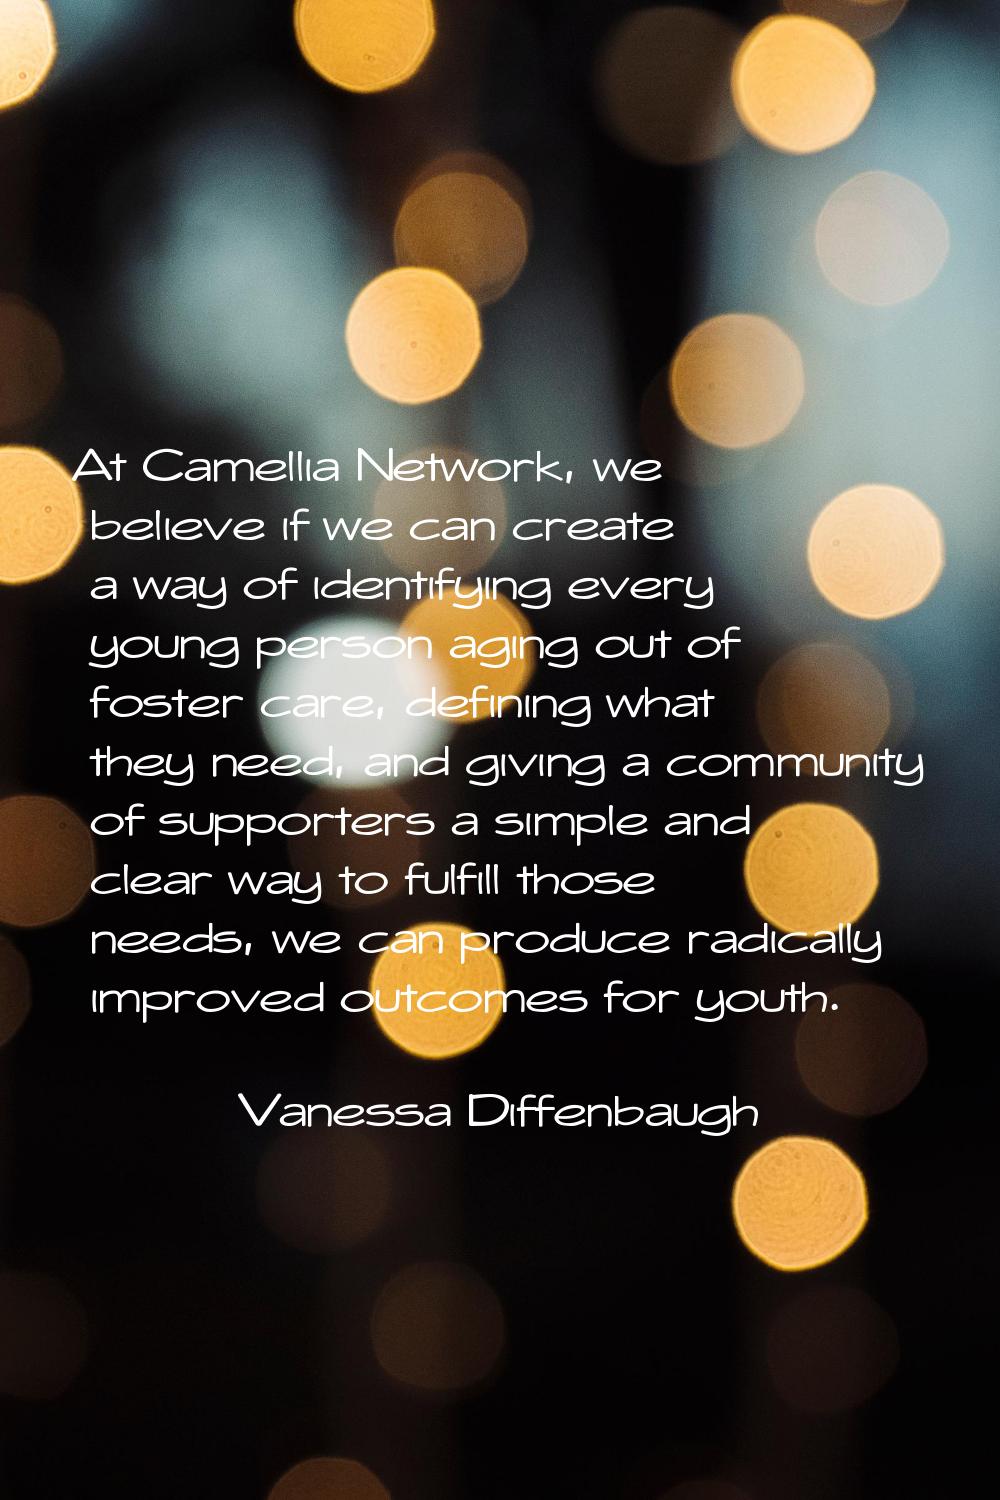 At Camellia Network, we believe if we can create a way of identifying every young person aging out 